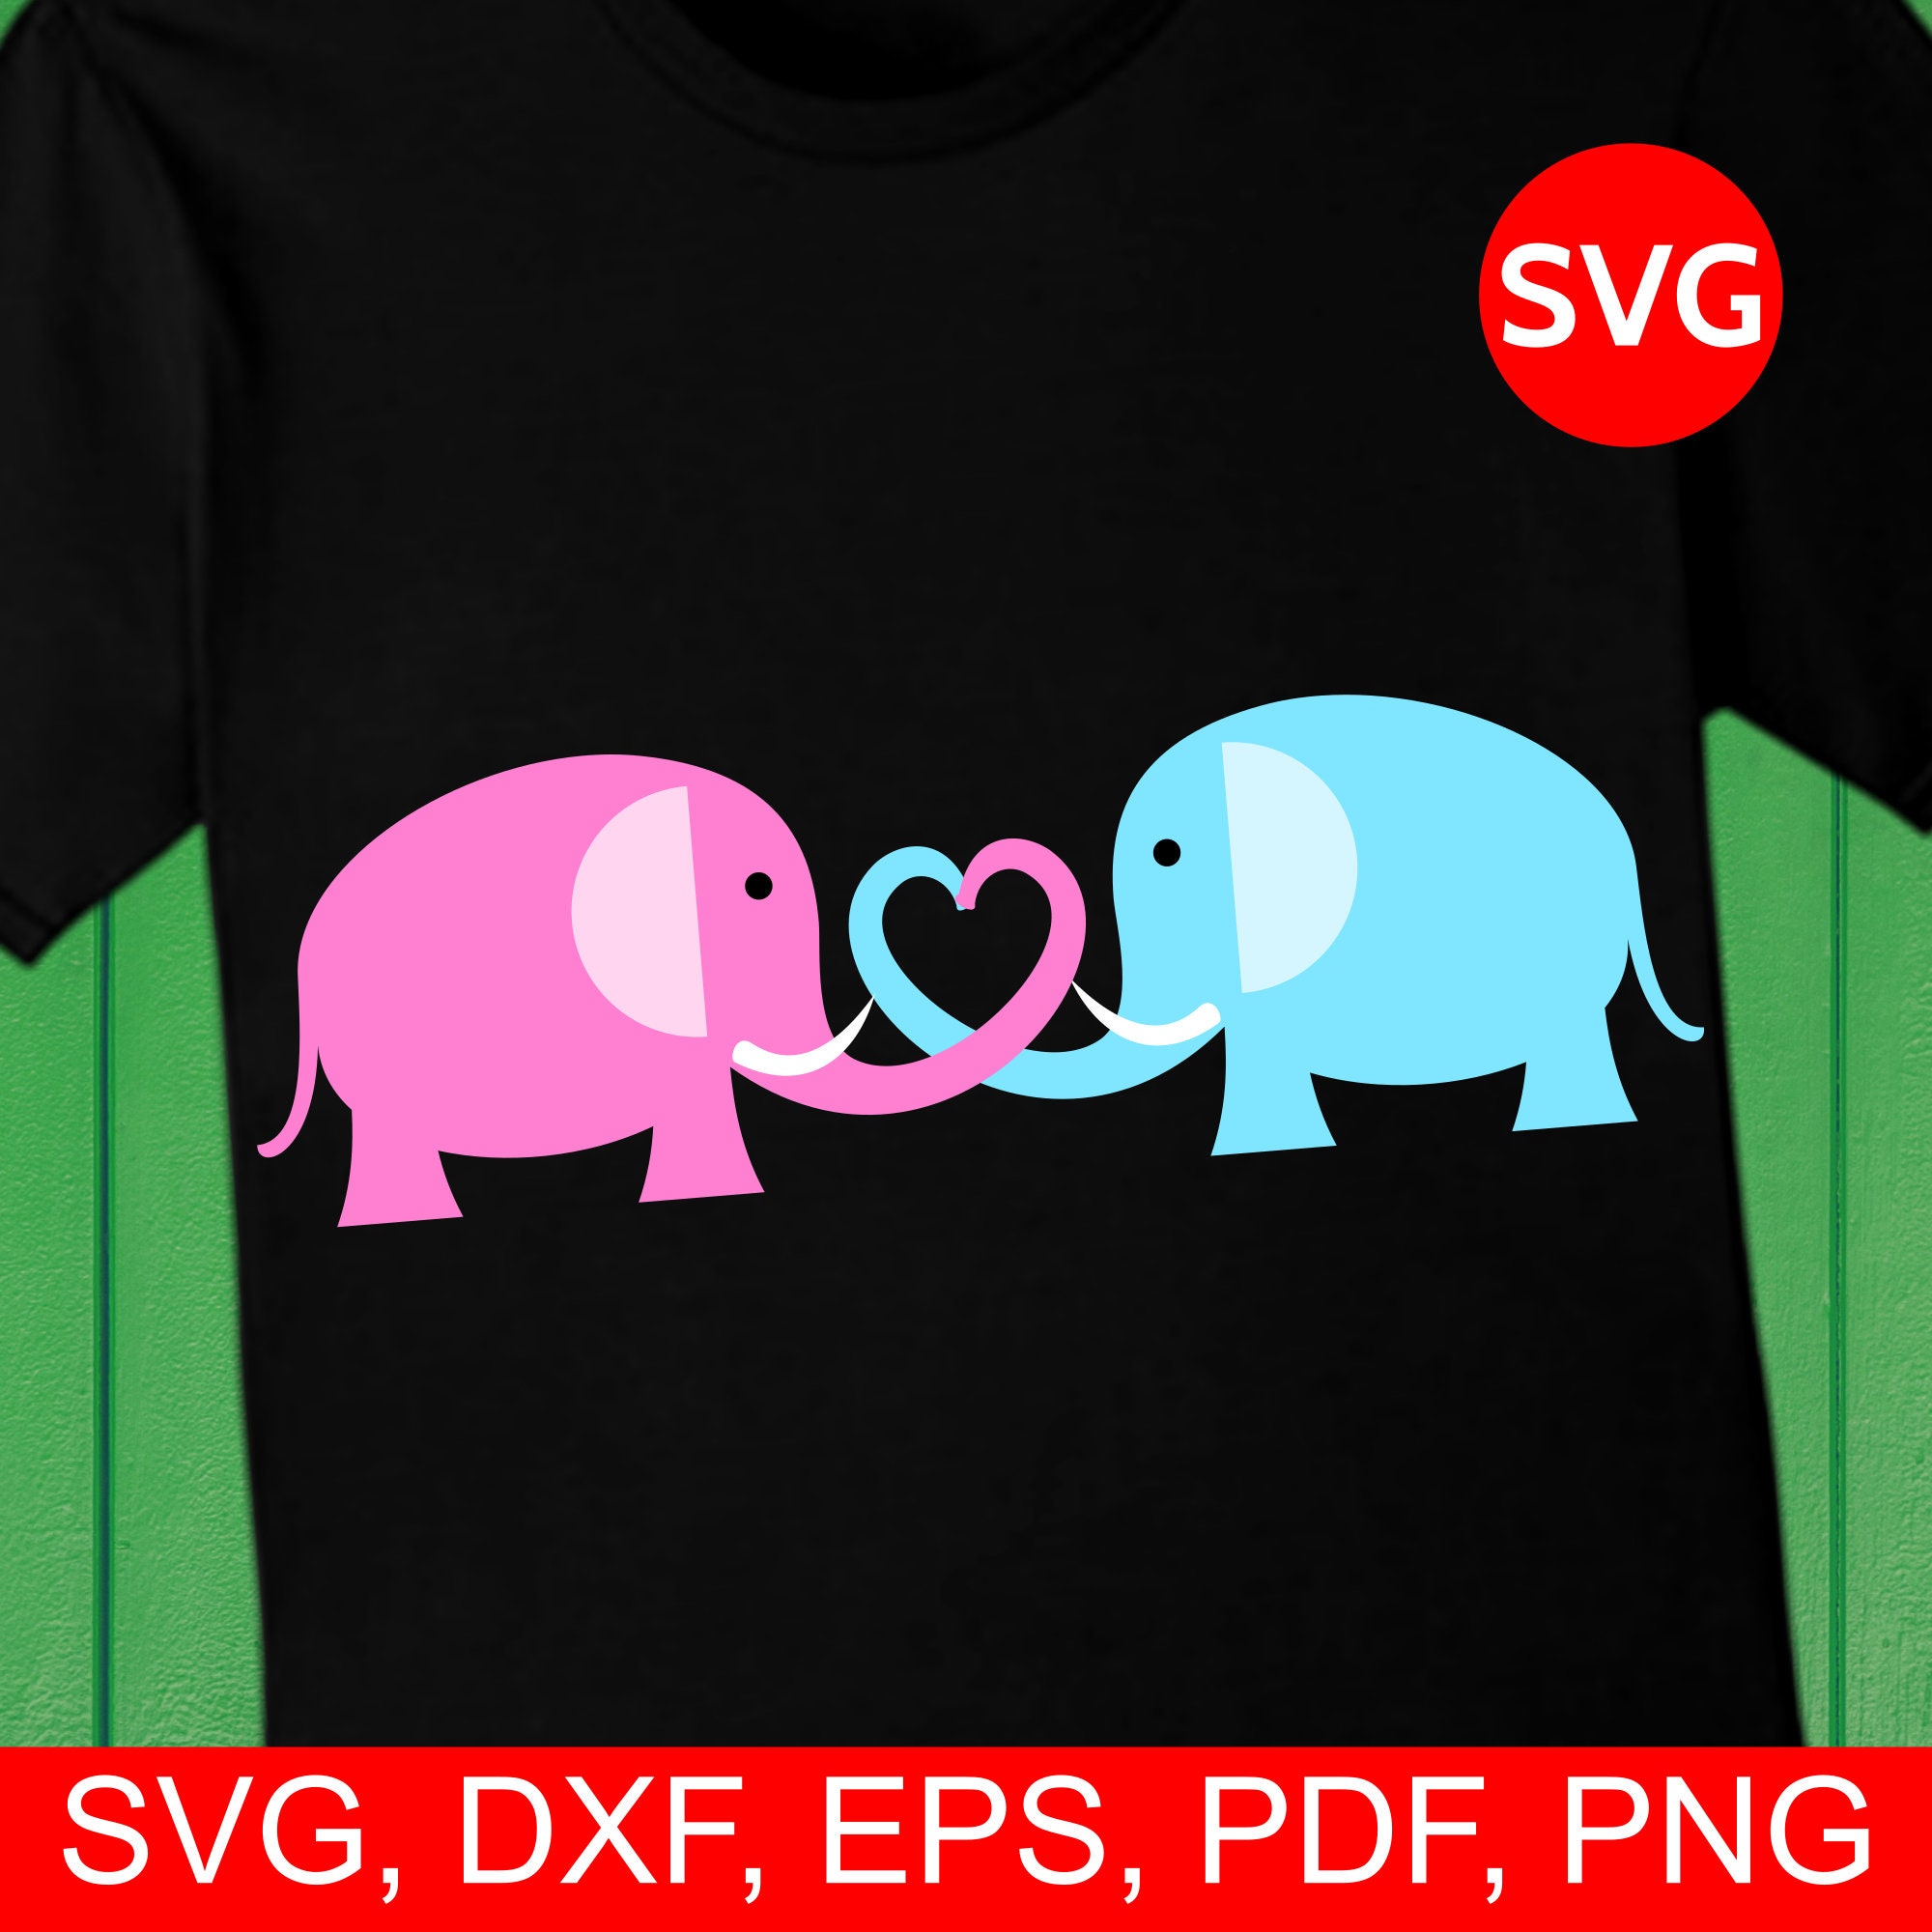 Download A Lovely Elephant Couple Making A Heart With Their Trunks Love Elephant Svg File For Cricut And Silhouette